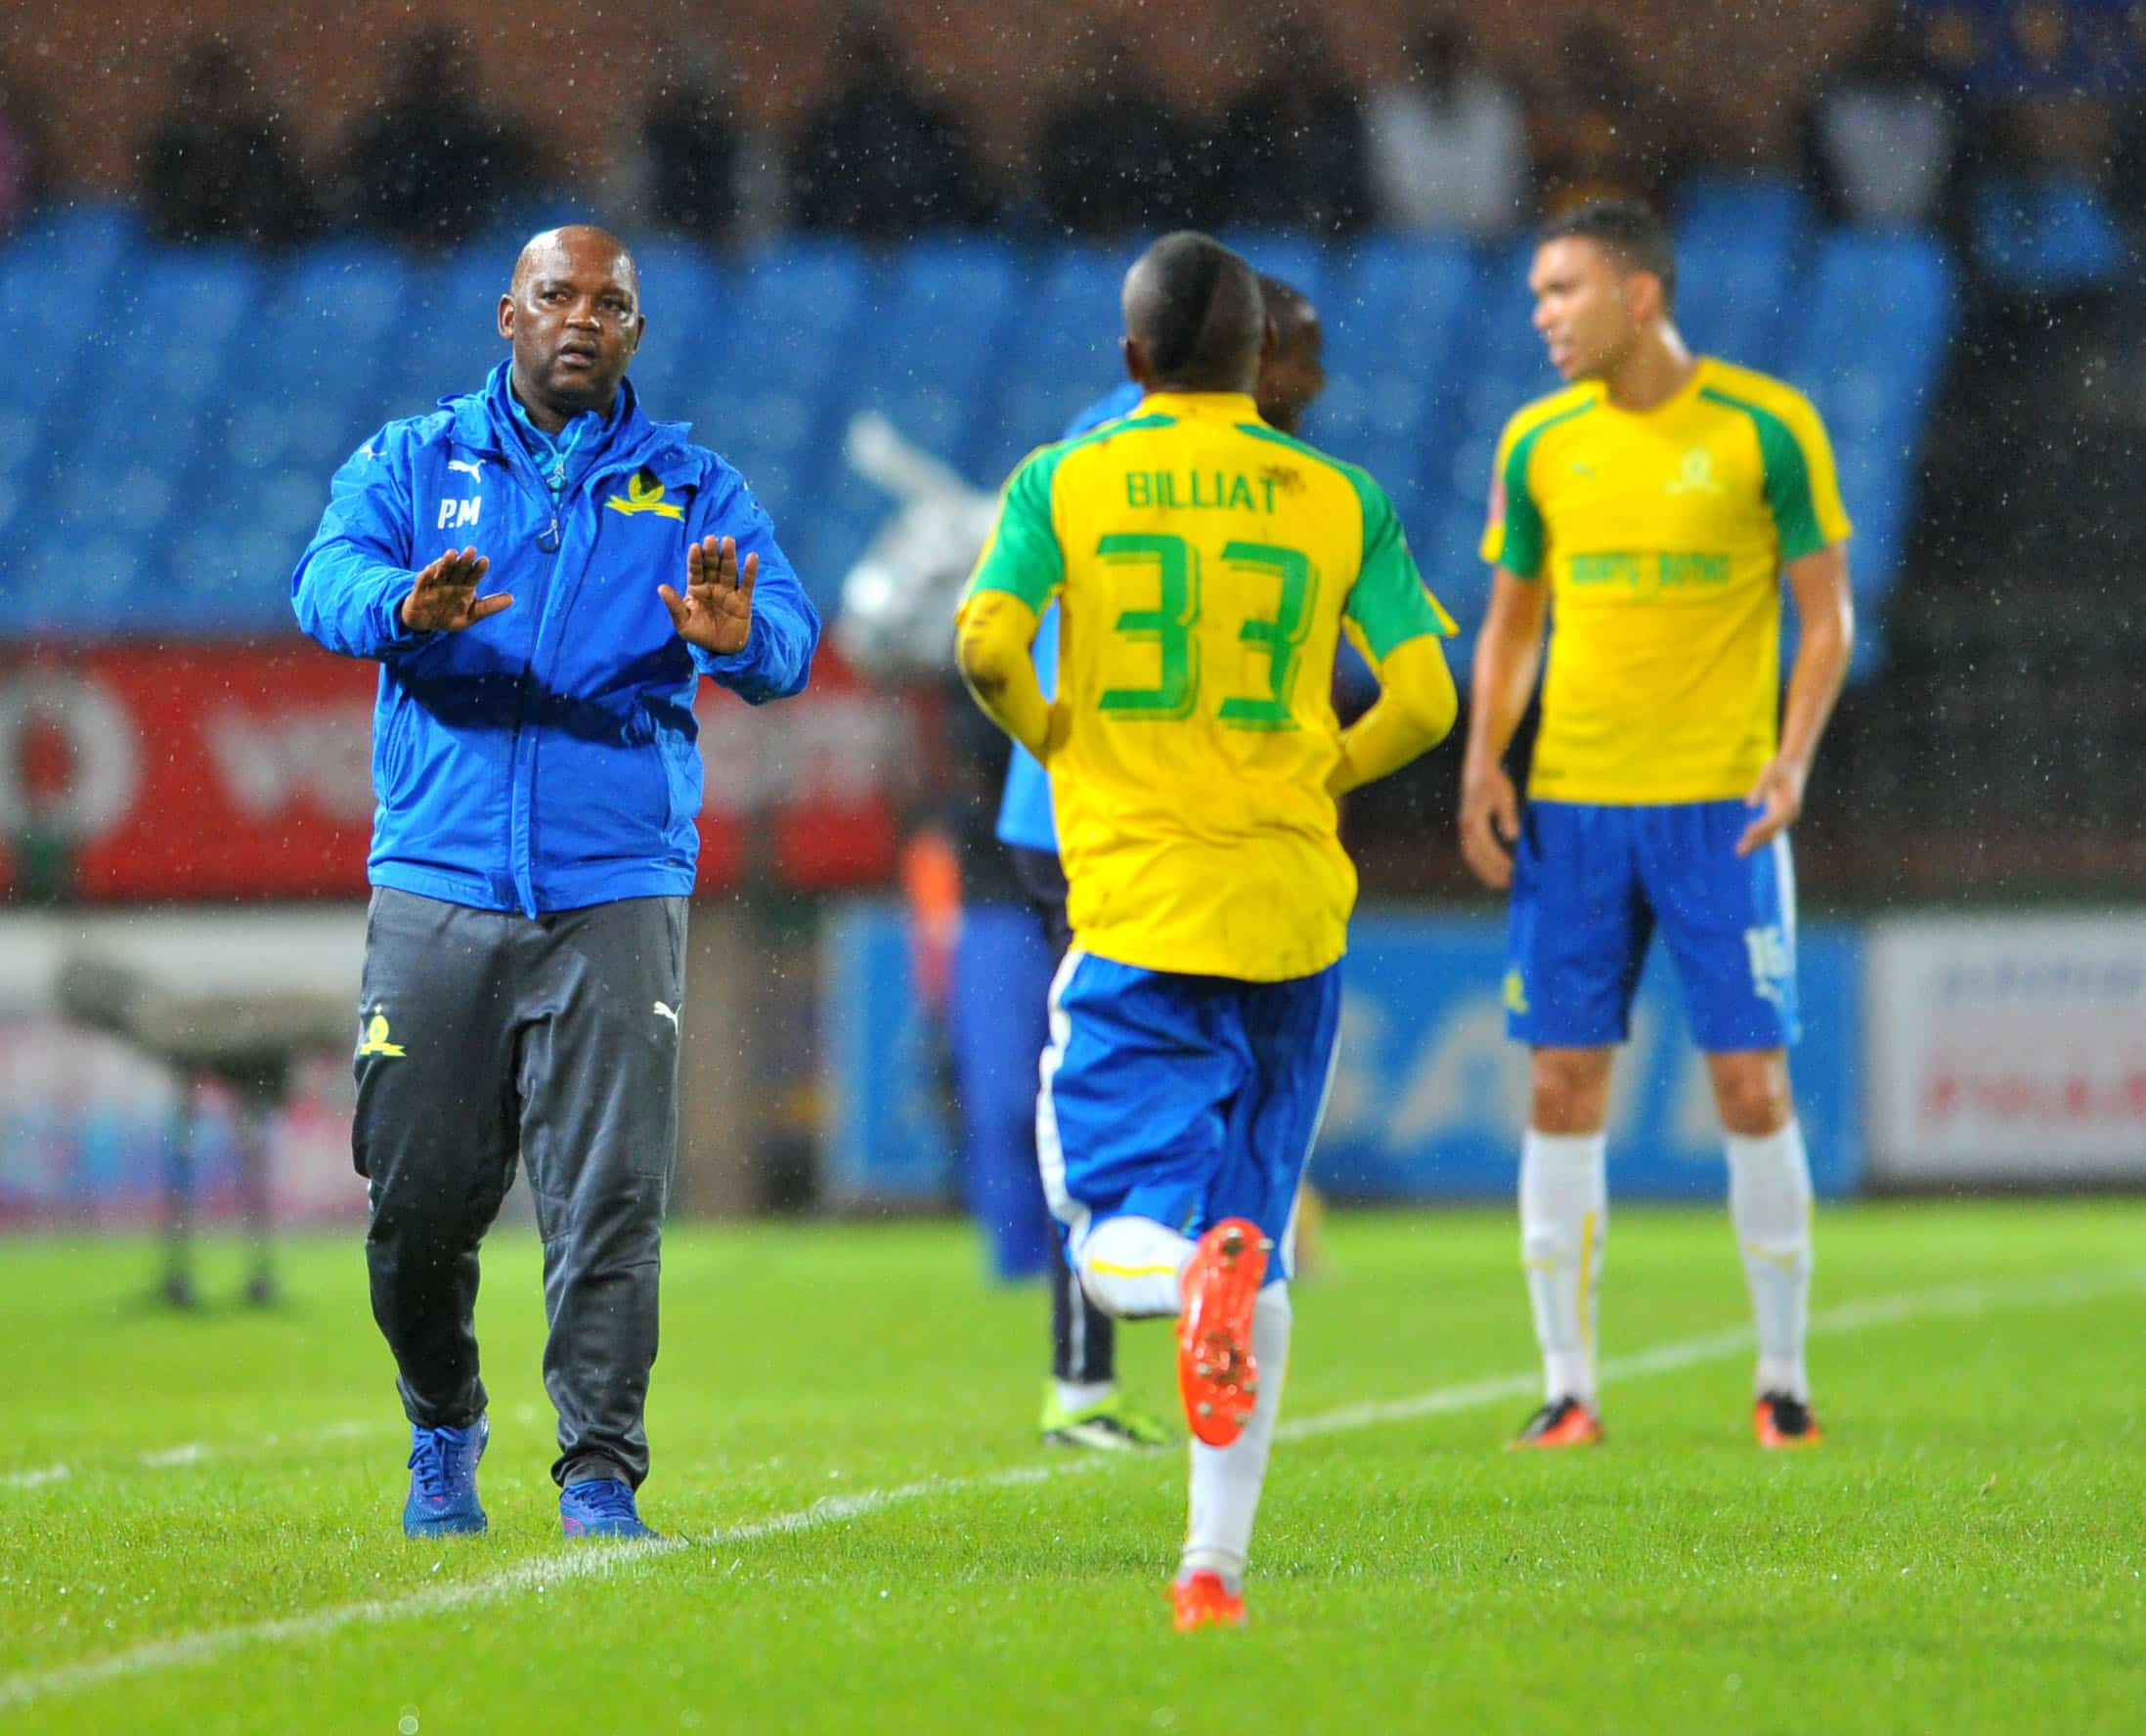 You are currently viewing Mosimane urges Billiat to rediscover his form